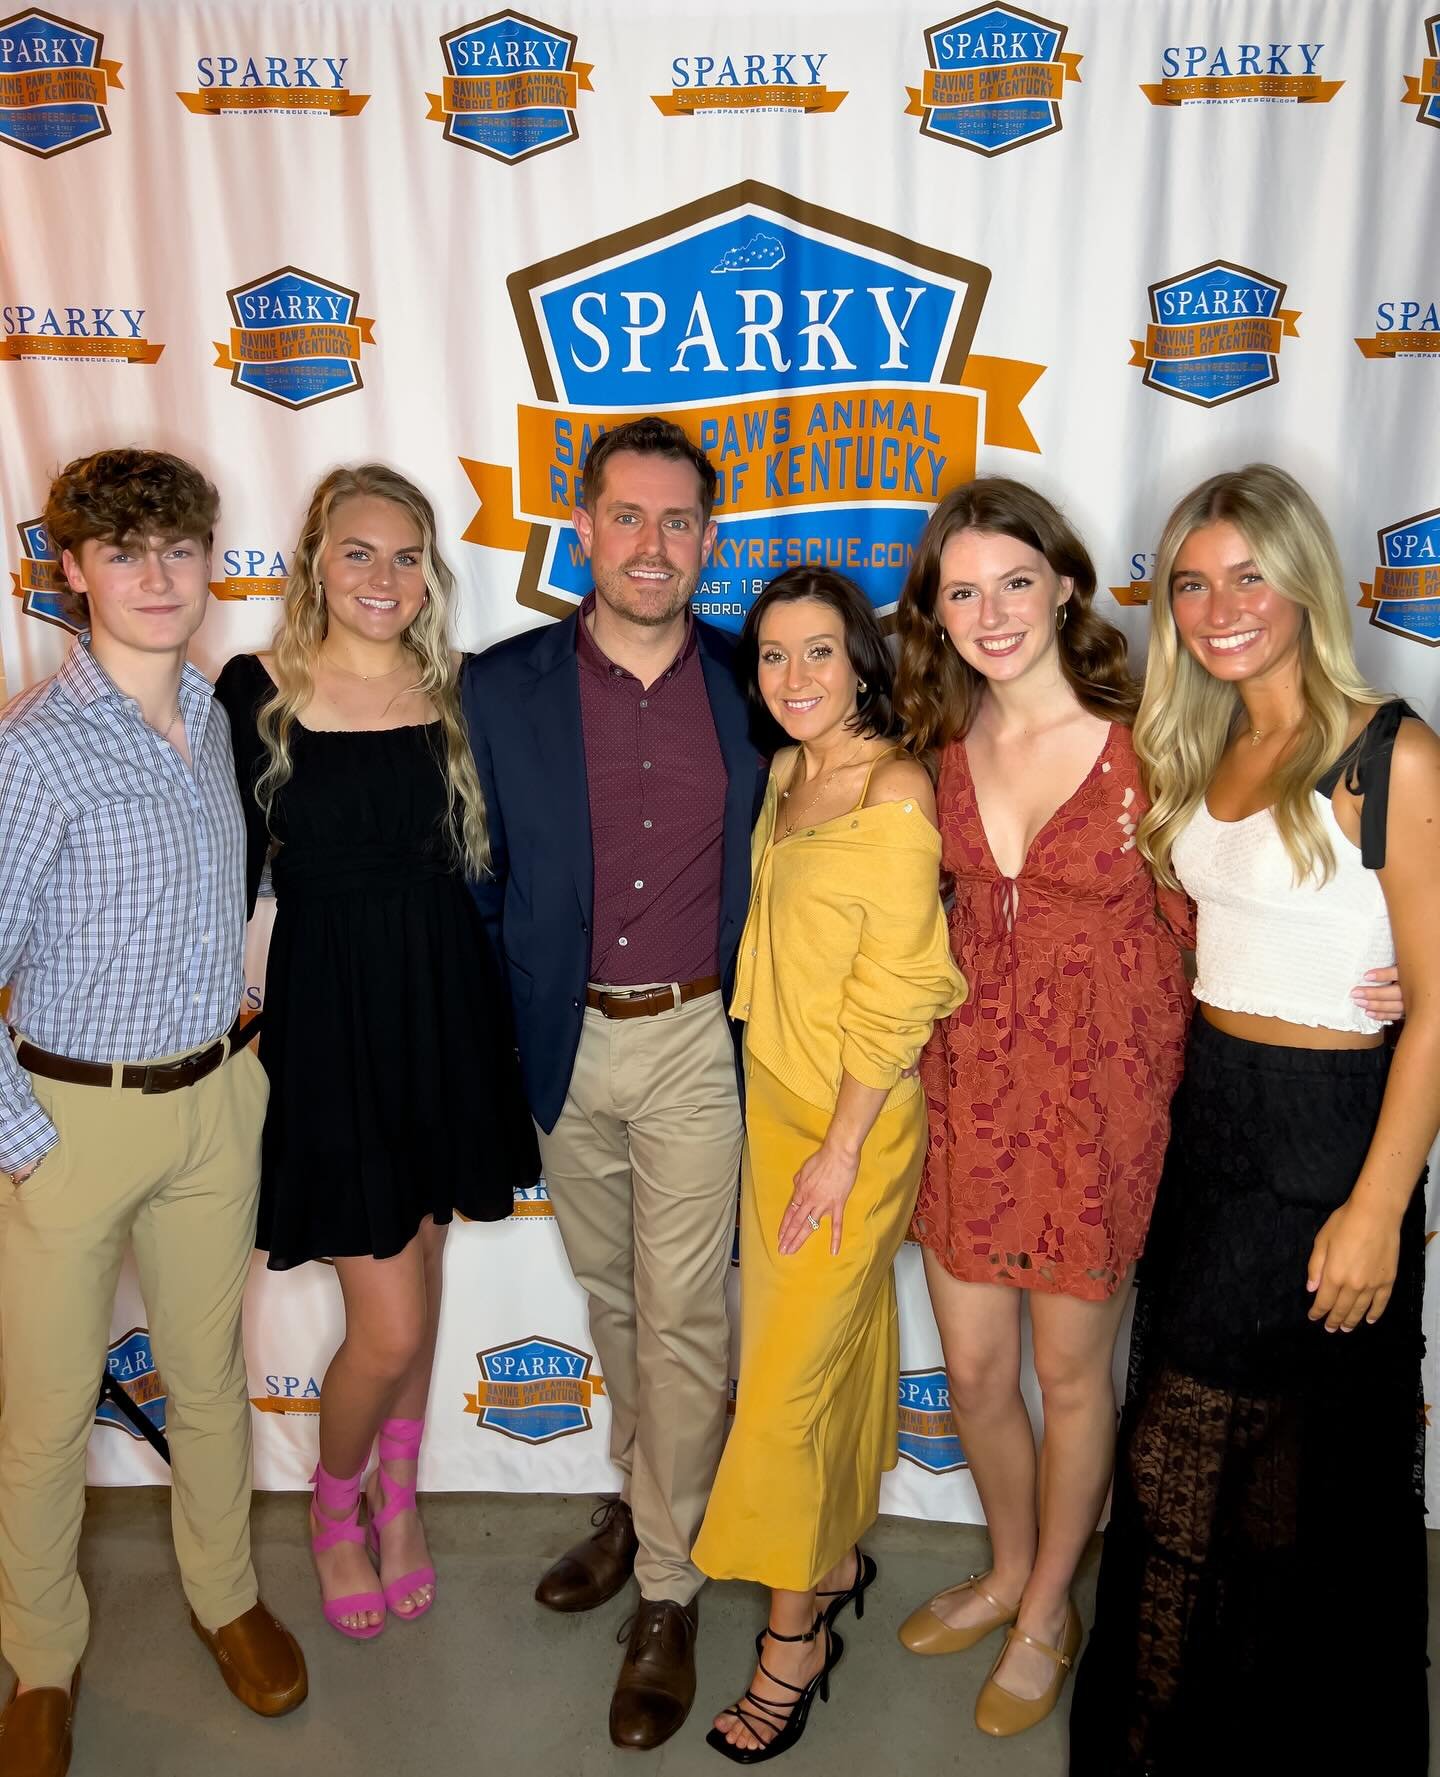 Our team had a wonderful evening at the SPARKY Bark In Style Fashion Show. There are so many amazing pups {&amp; kitties} available for adoption and foster! Interested? Visit them @sparkyrescueowb